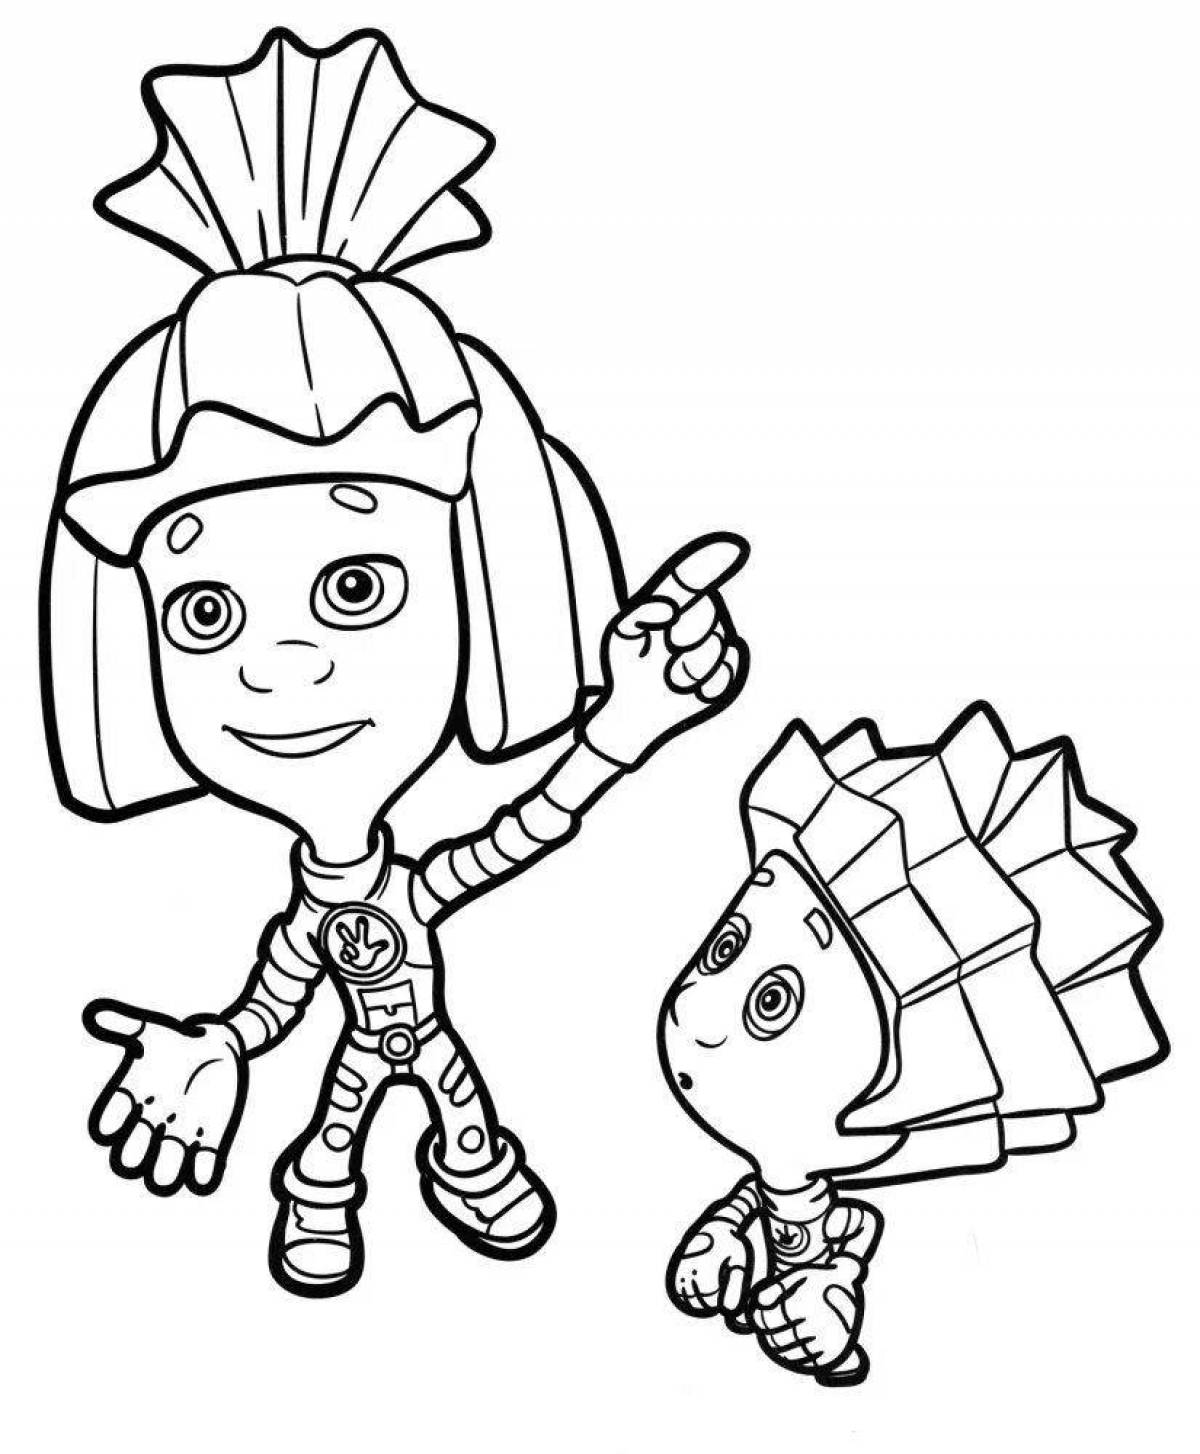 Funny zero and sim coloring page